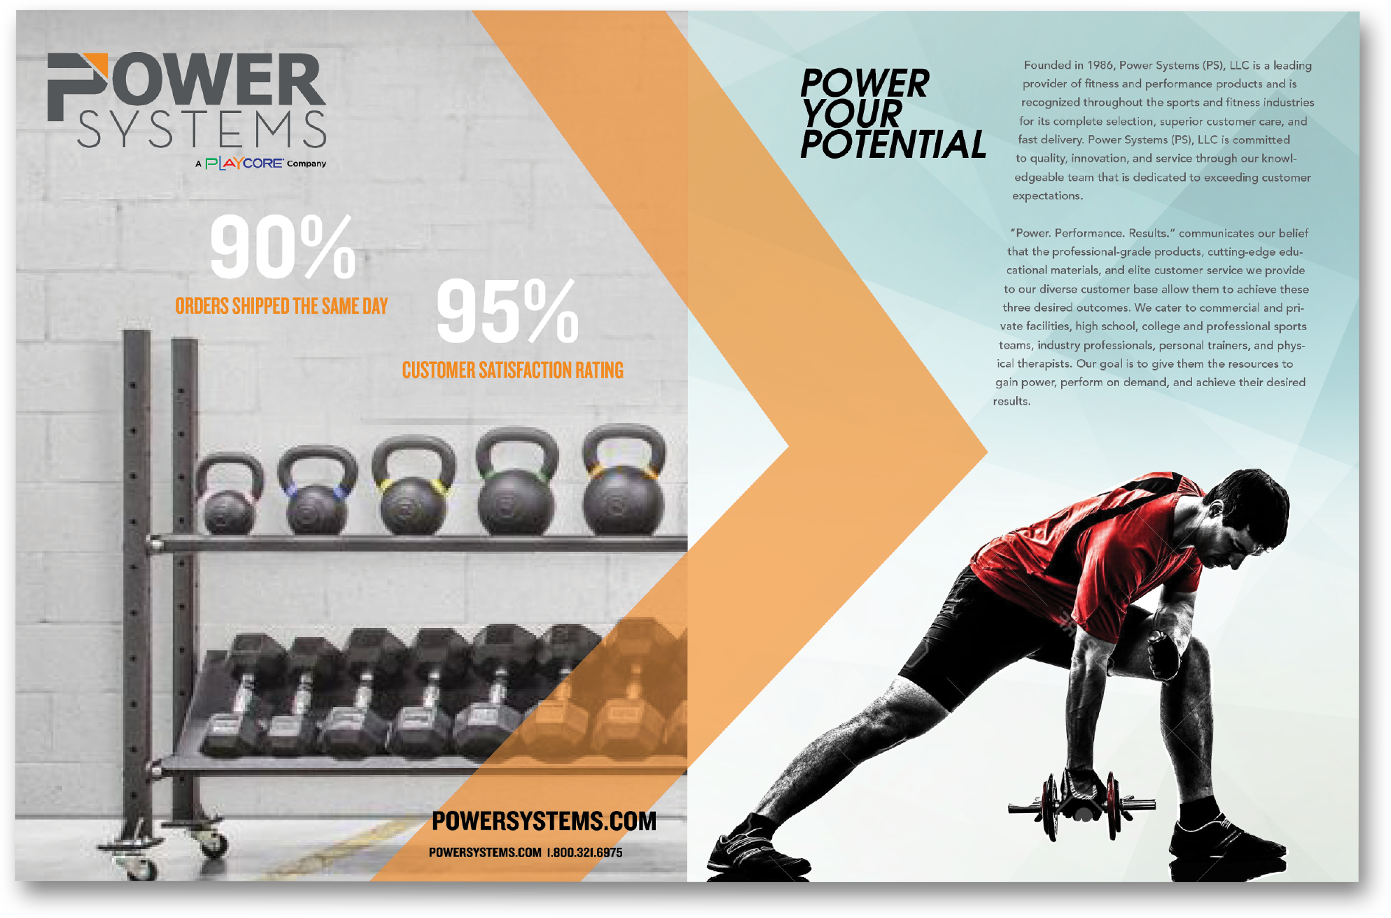 Power Systems catalog page; row of free weights and kettle bells next to a man lifting weights